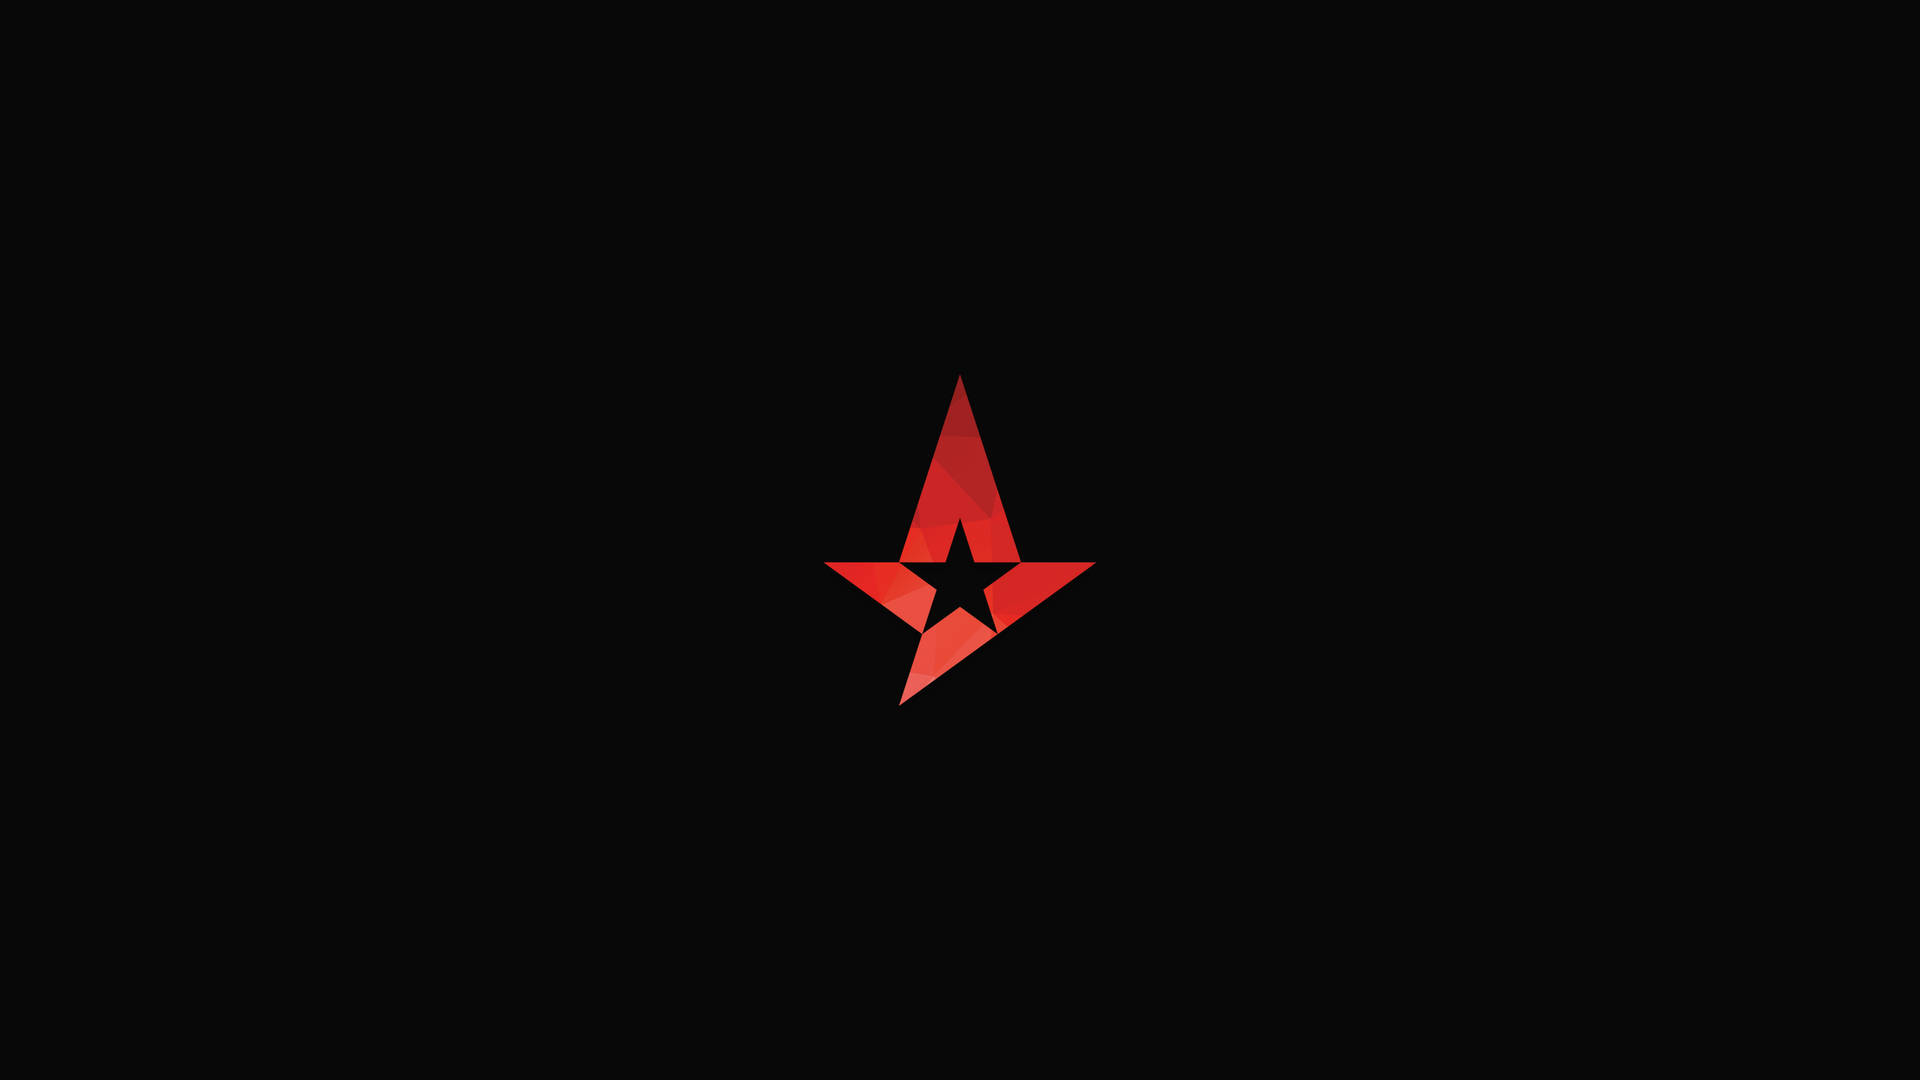 Astralis Dominating the CS:GO Arena with Their Iconic Logo Wallpaper